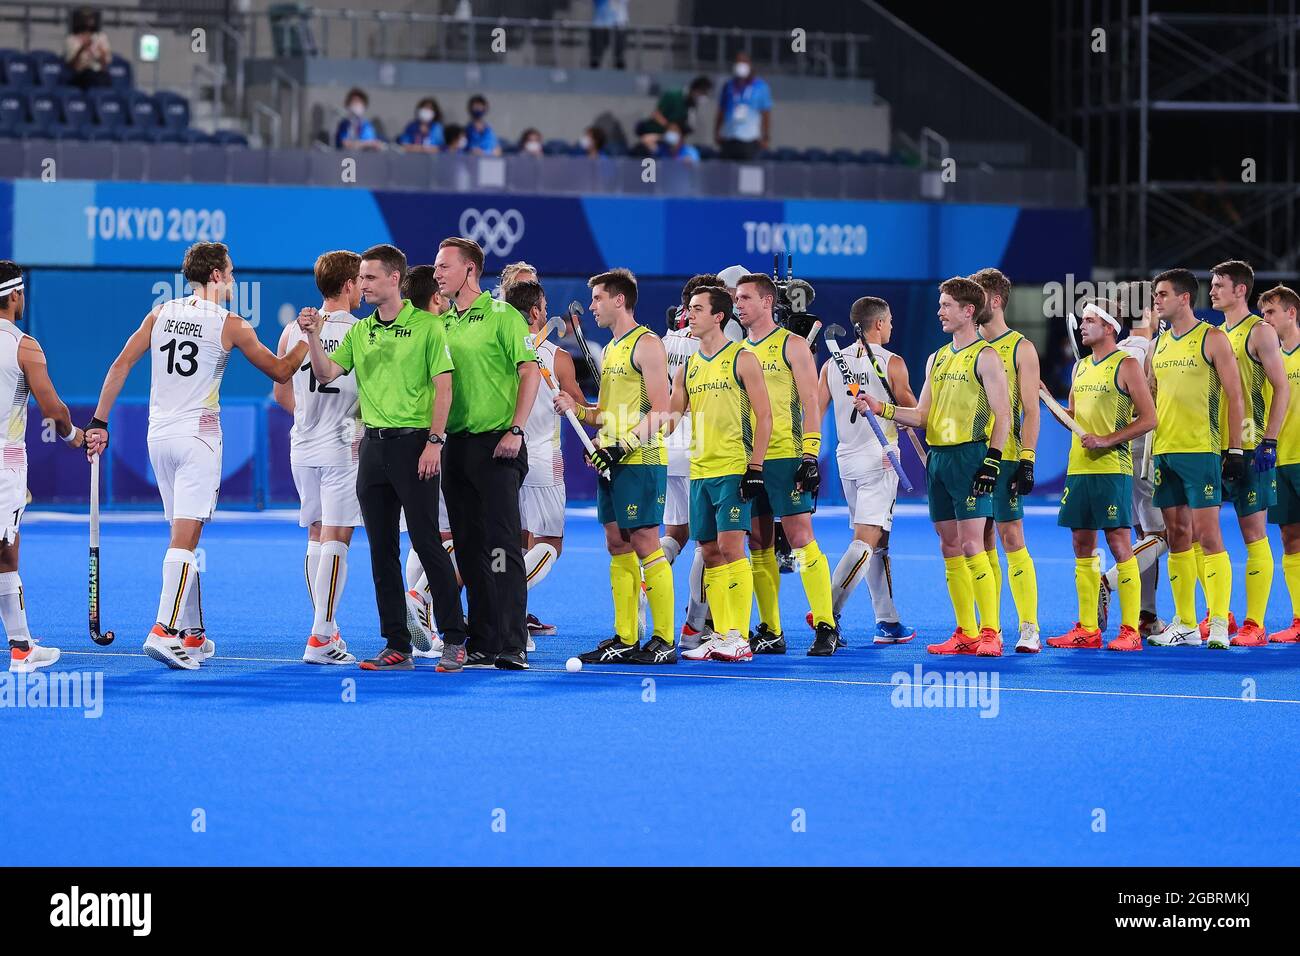 Tokyo, Japan, 5 August, 2021. Players greet each other during the Men's Hockey Gold Medal match between Australia and Belgium on Day 13 of the Tokyo 2020 Olympic Games. Credit: Pete Dovgan/Speed Media/Alamy Live News Stock Photo